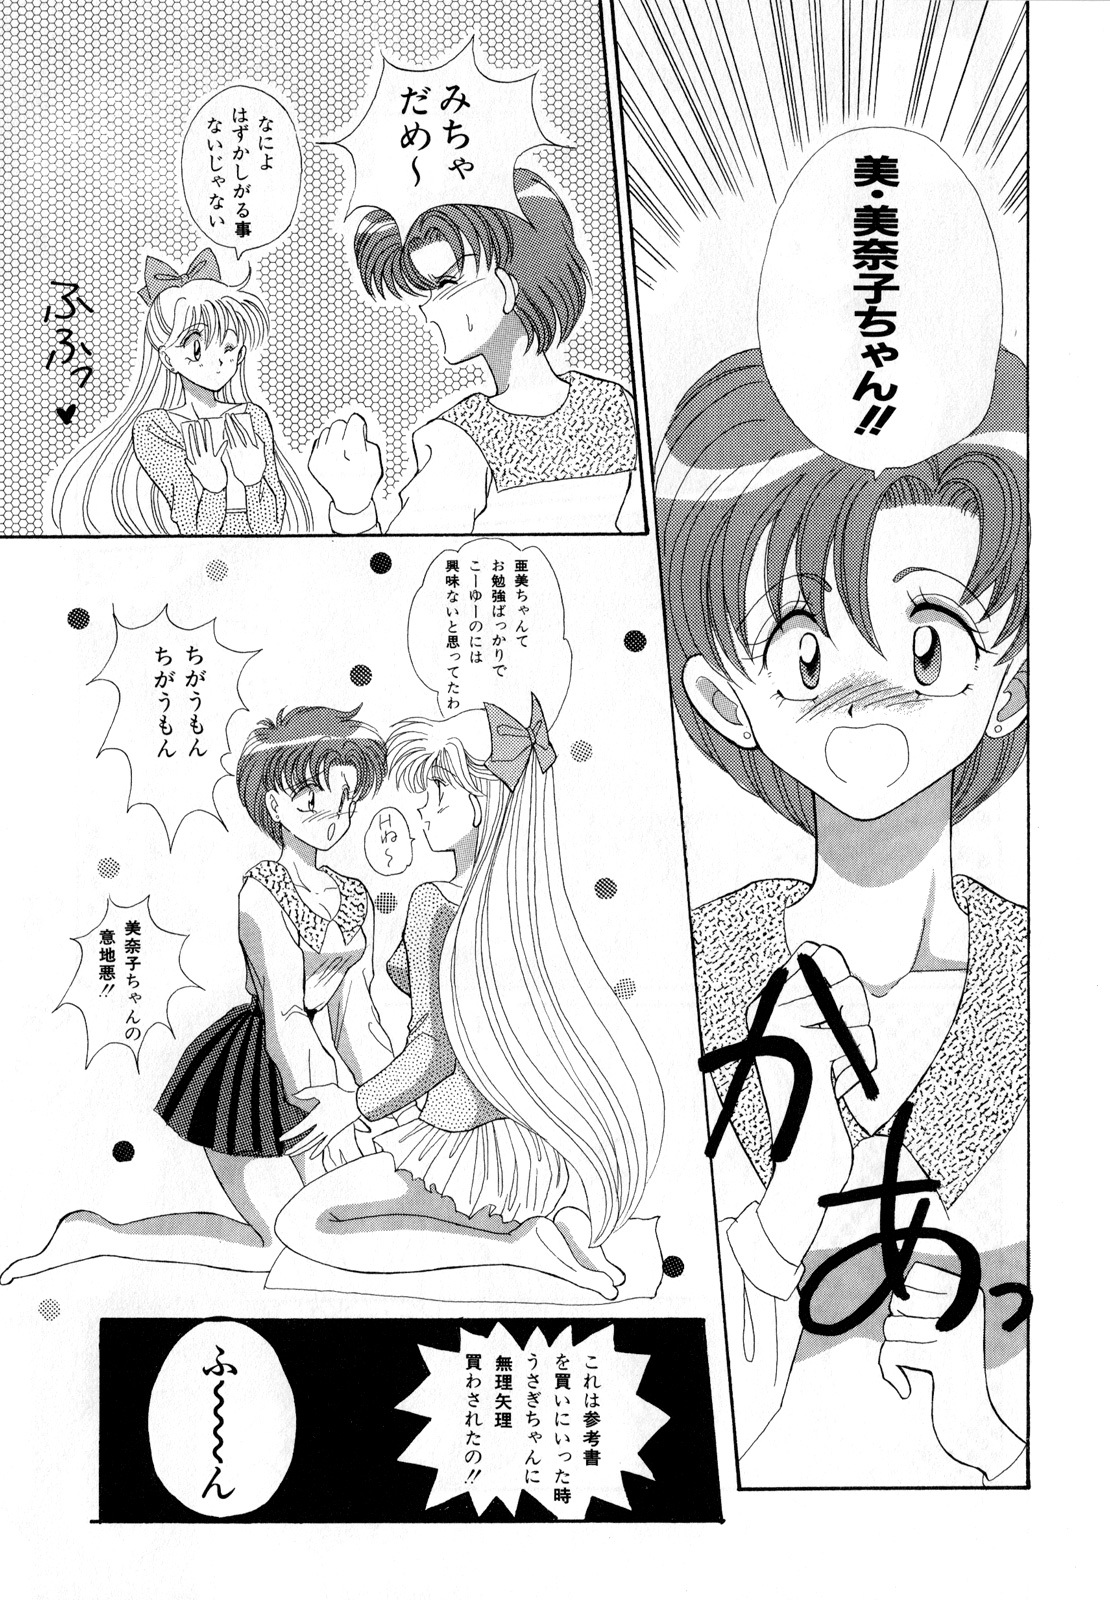 [Anthology] Lunatic Party 3 (Sailor Moon) page 44 full